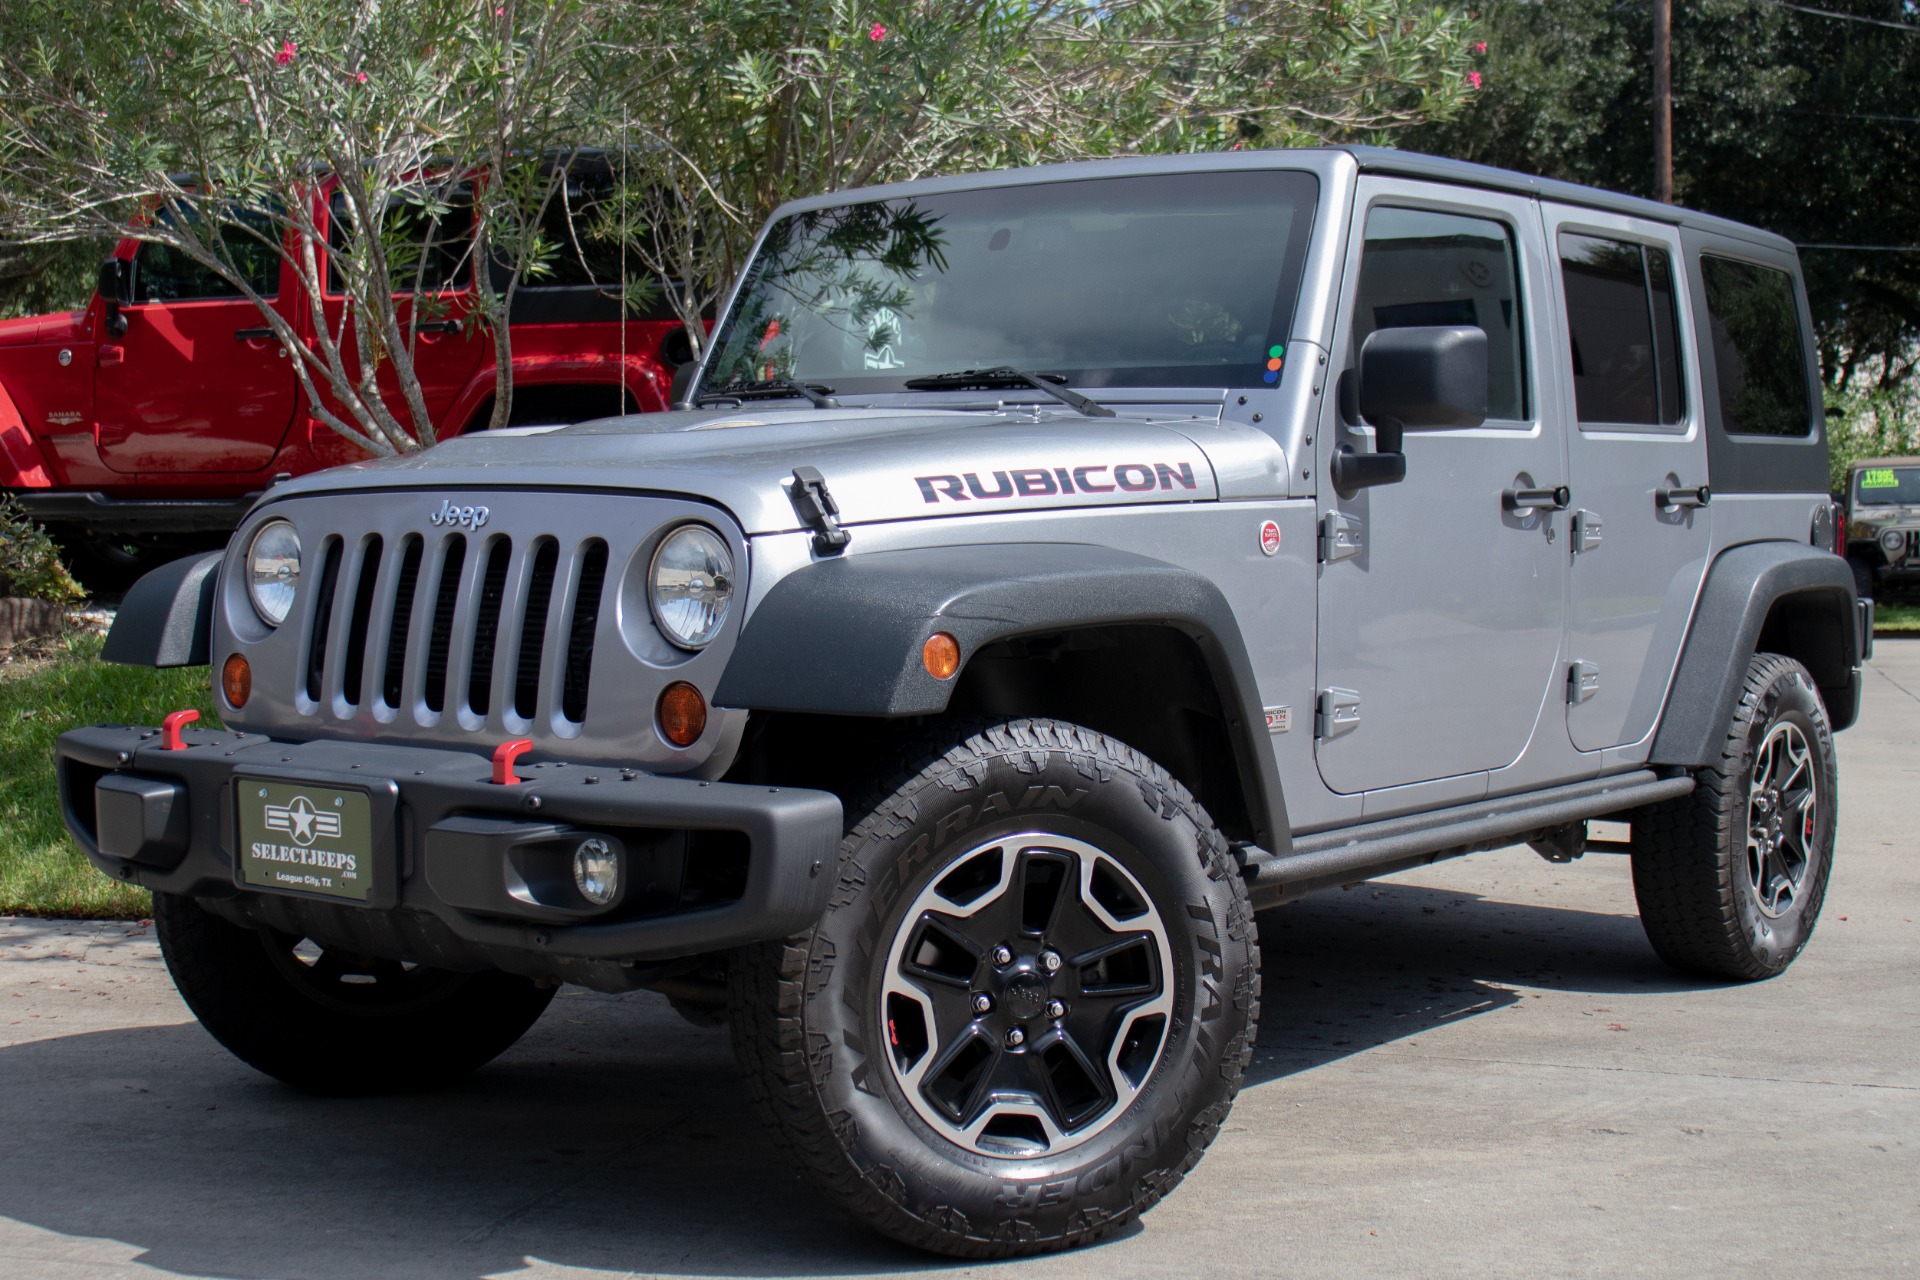 Used 2013 Jeep Wrangler Unlimited 10th Anniversary Rubicon For Sale  ($30,995) | Select Jeeps Inc. Stock #687677